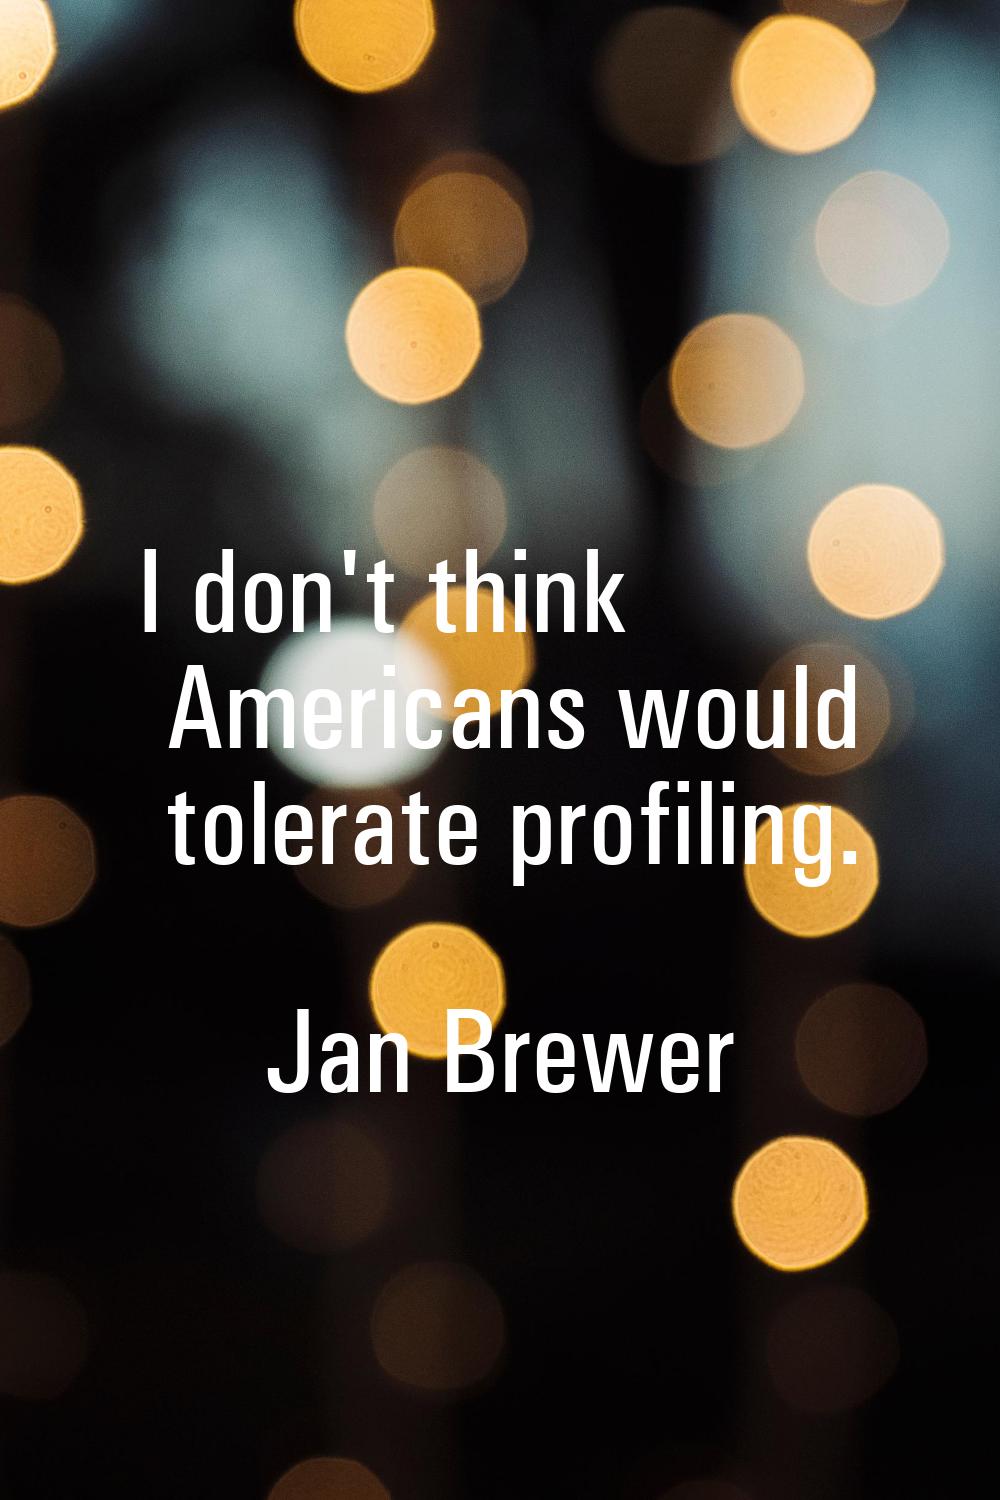 I don't think Americans would tolerate profiling.